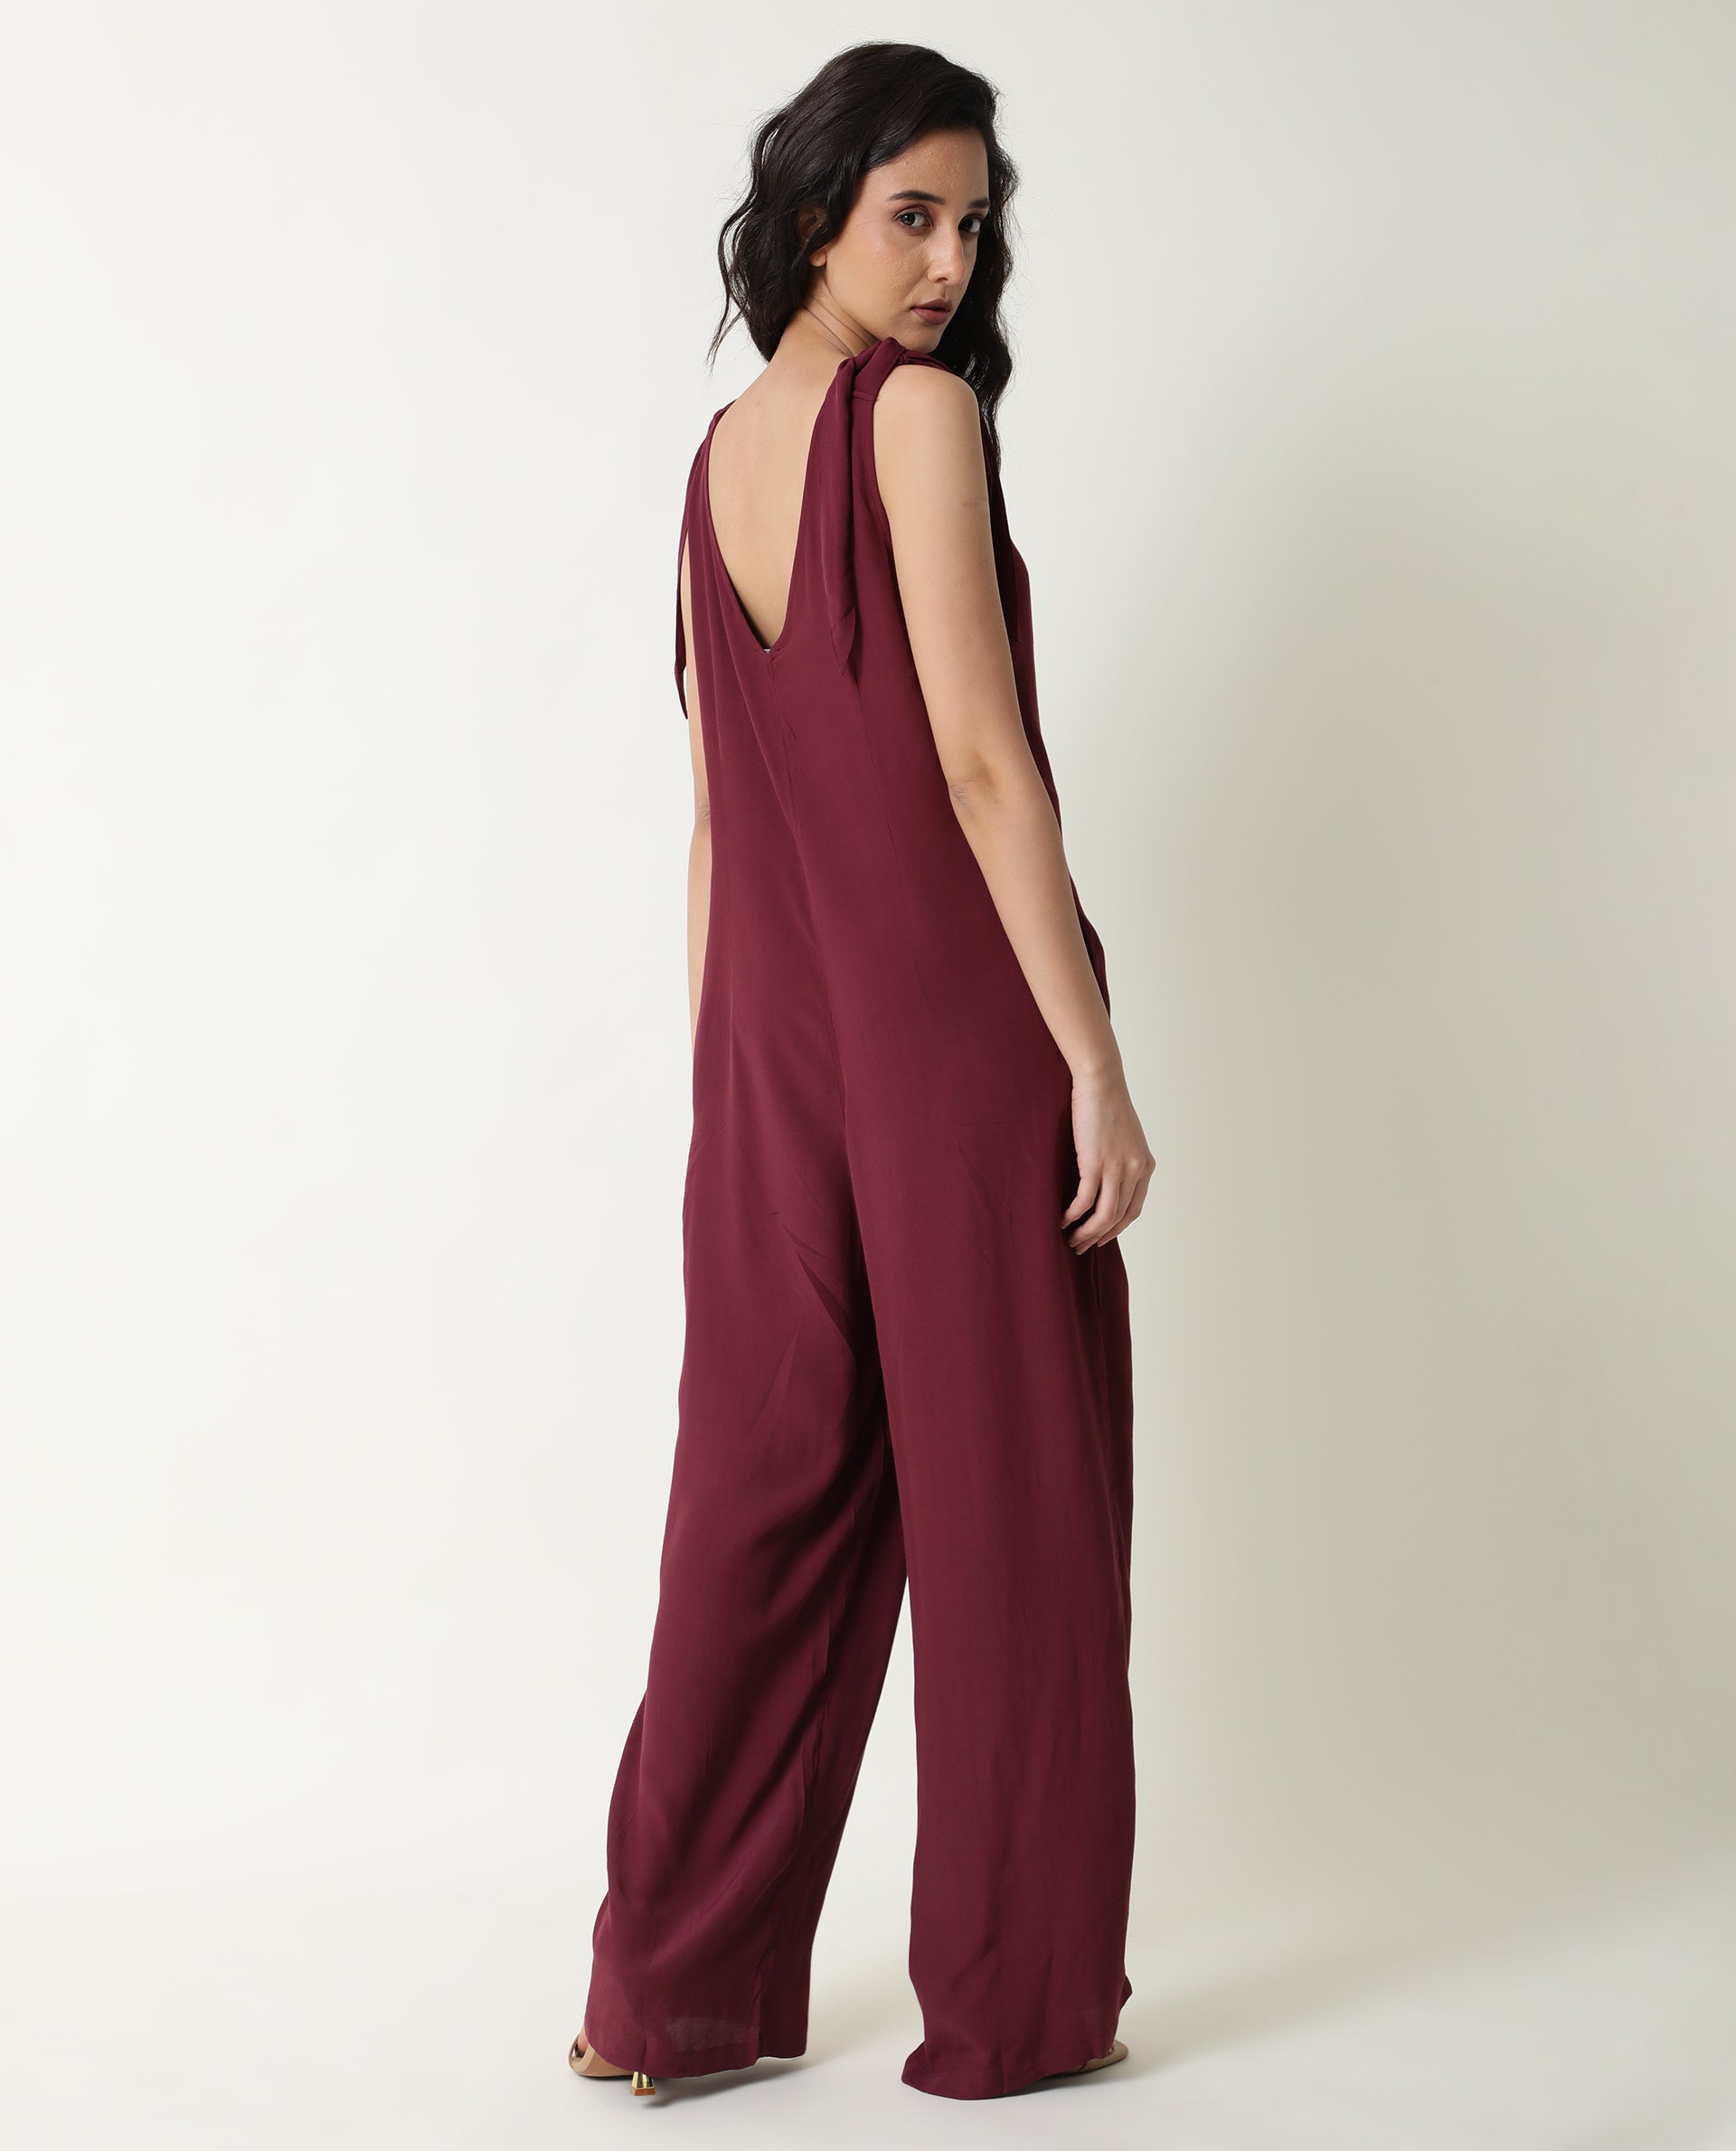 TheShaili trendy jumpsuit collection combines style and comfort